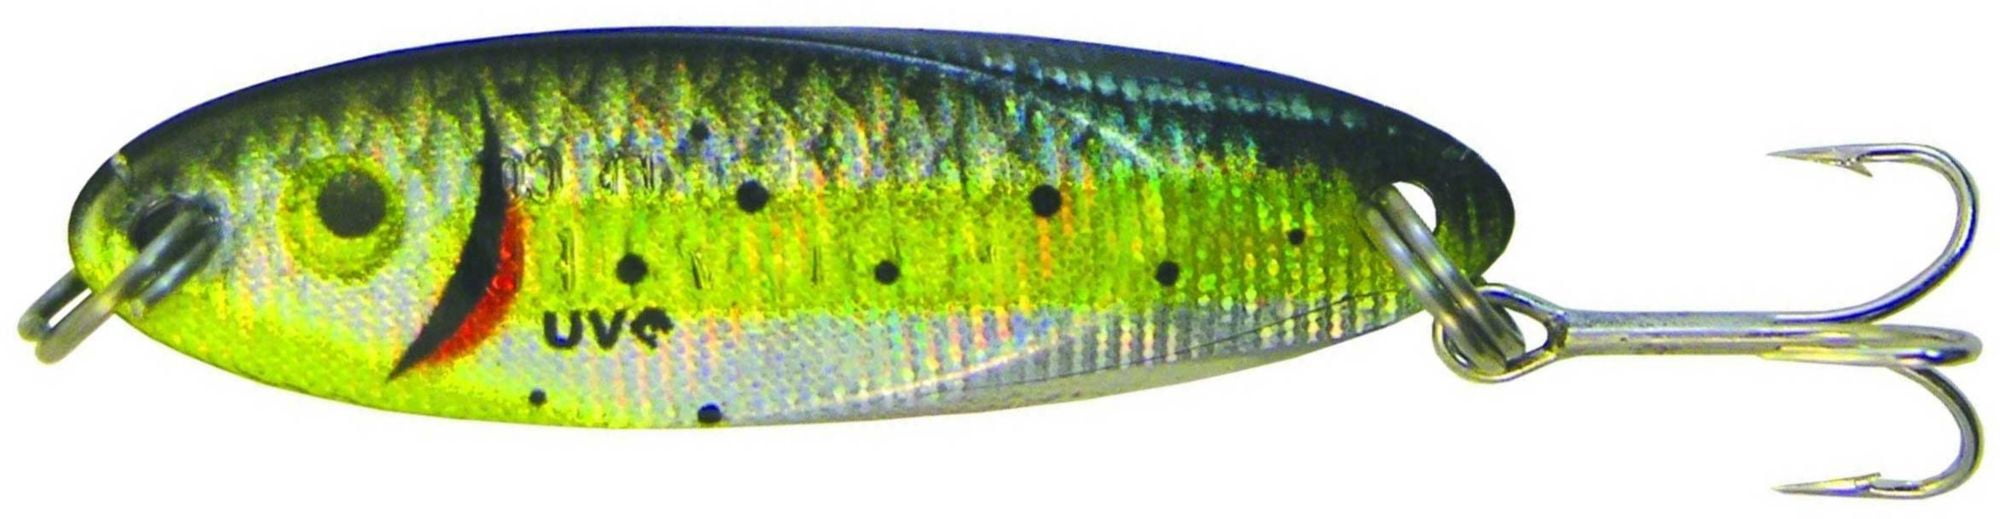 castmaster fishing lures